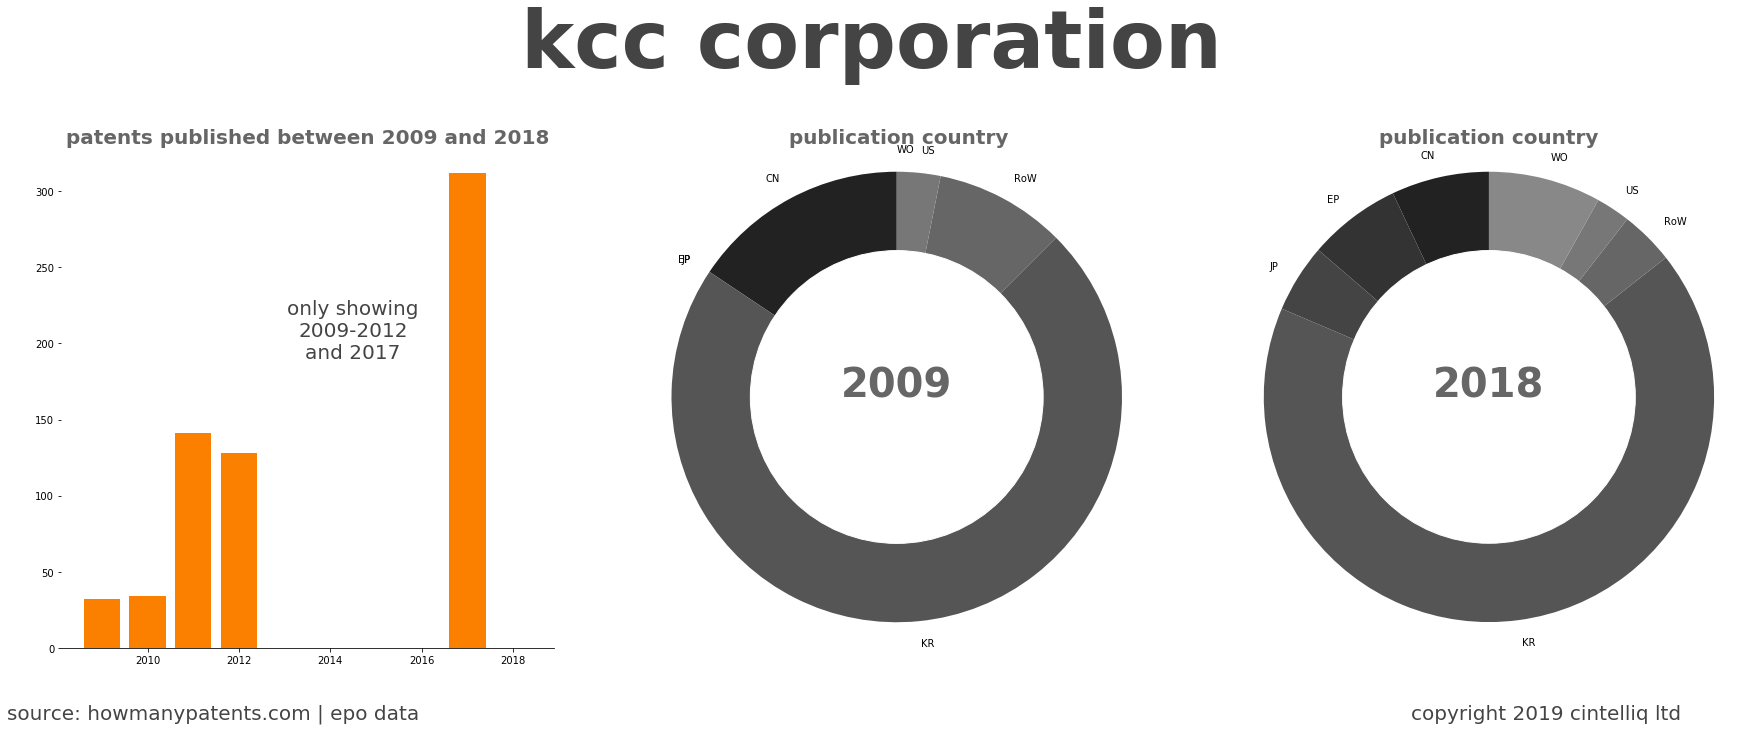 summary of patents for Kcc Corporation